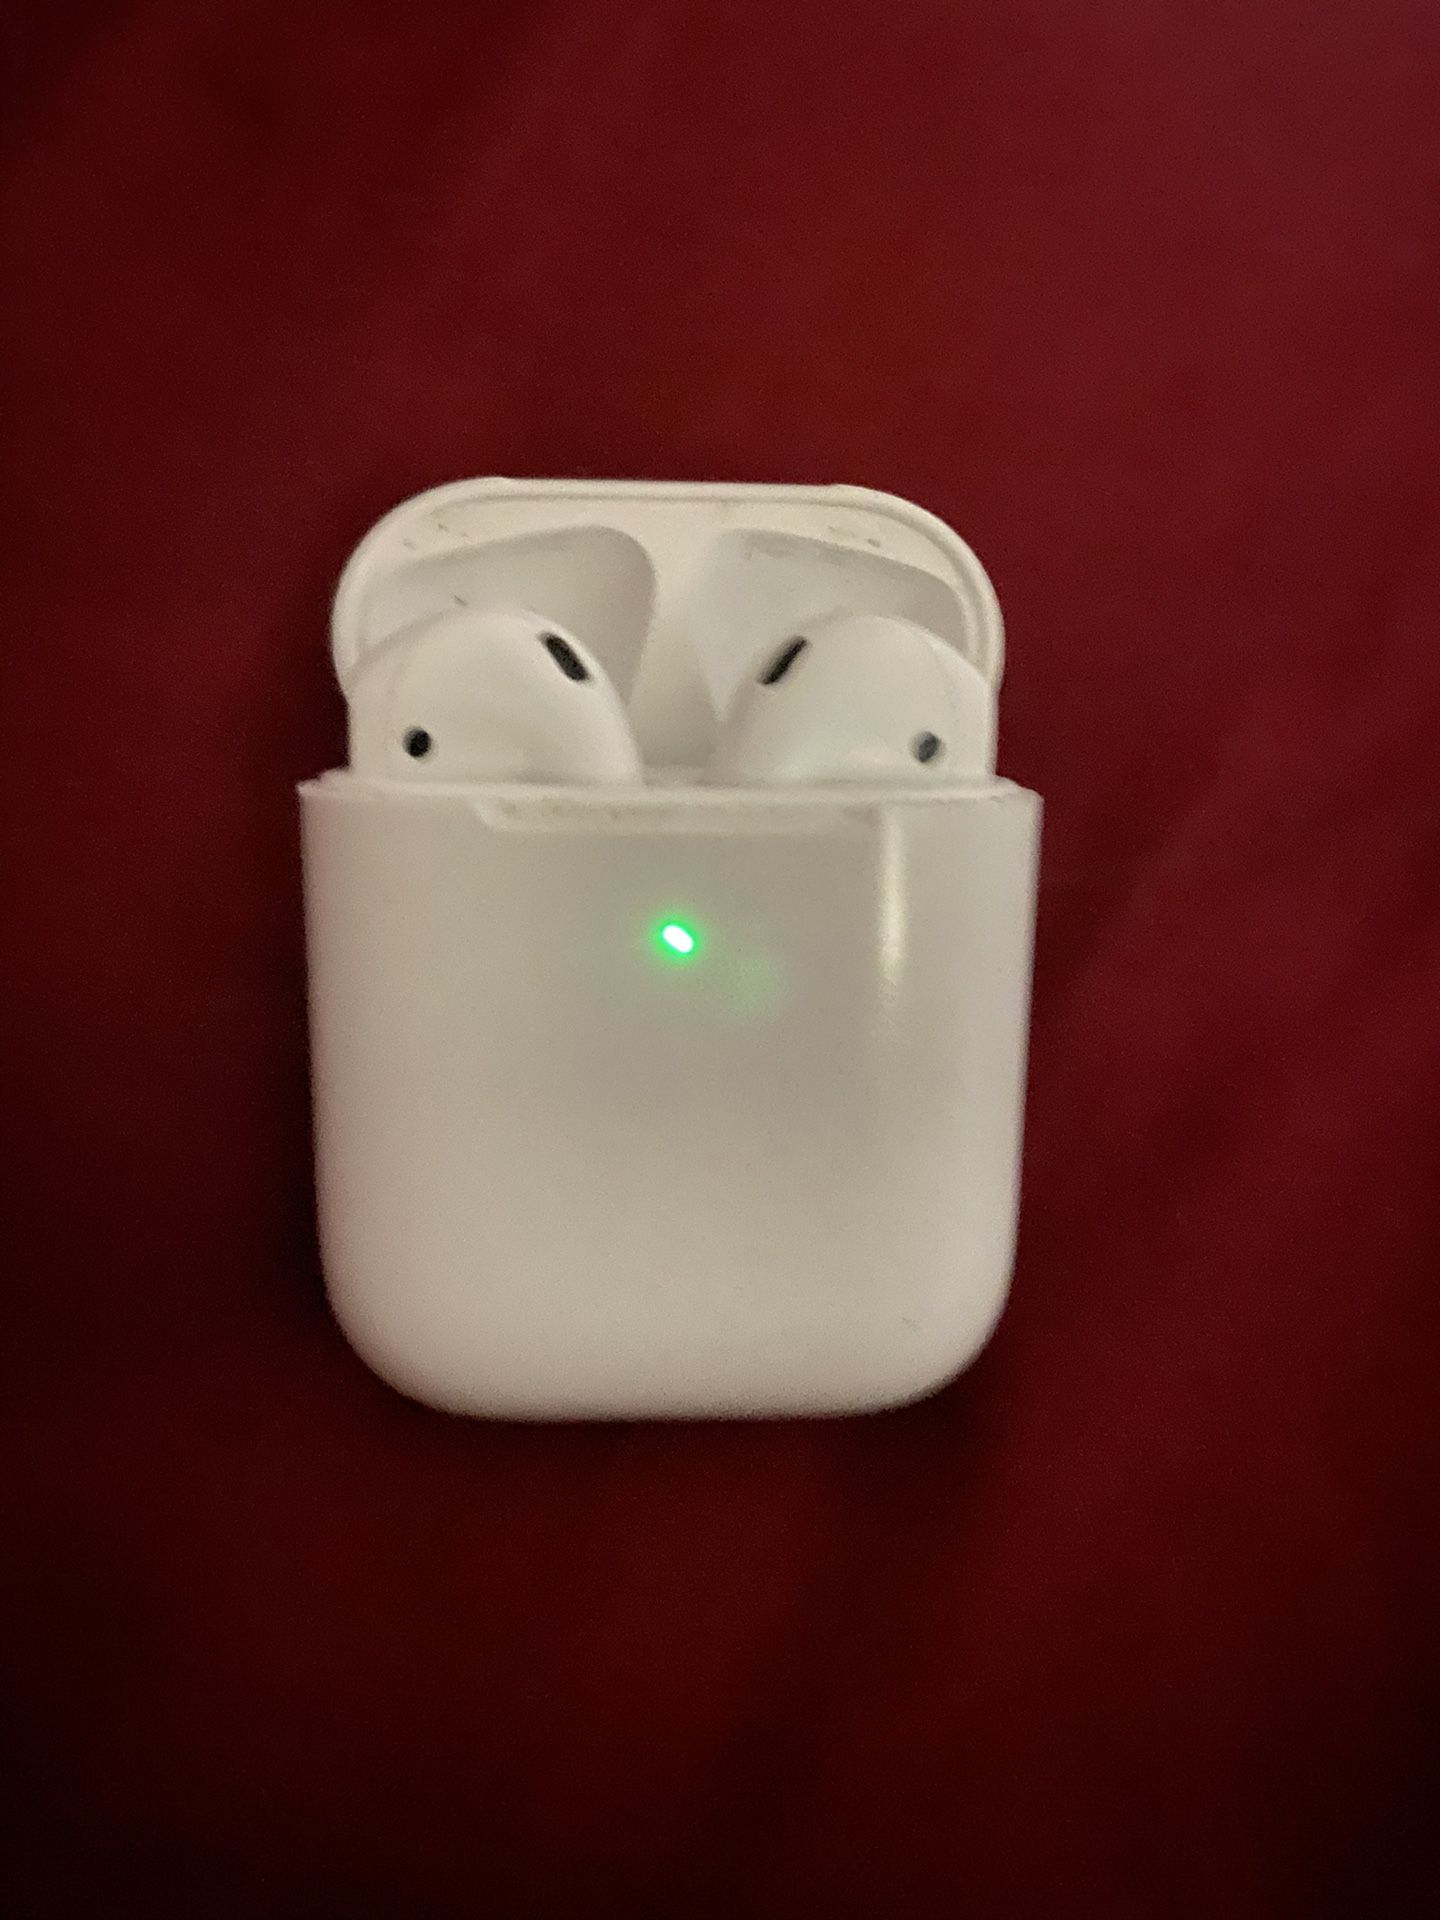 APPLE 2ND GEN AIRPODS (like new) CASE INCLUDED